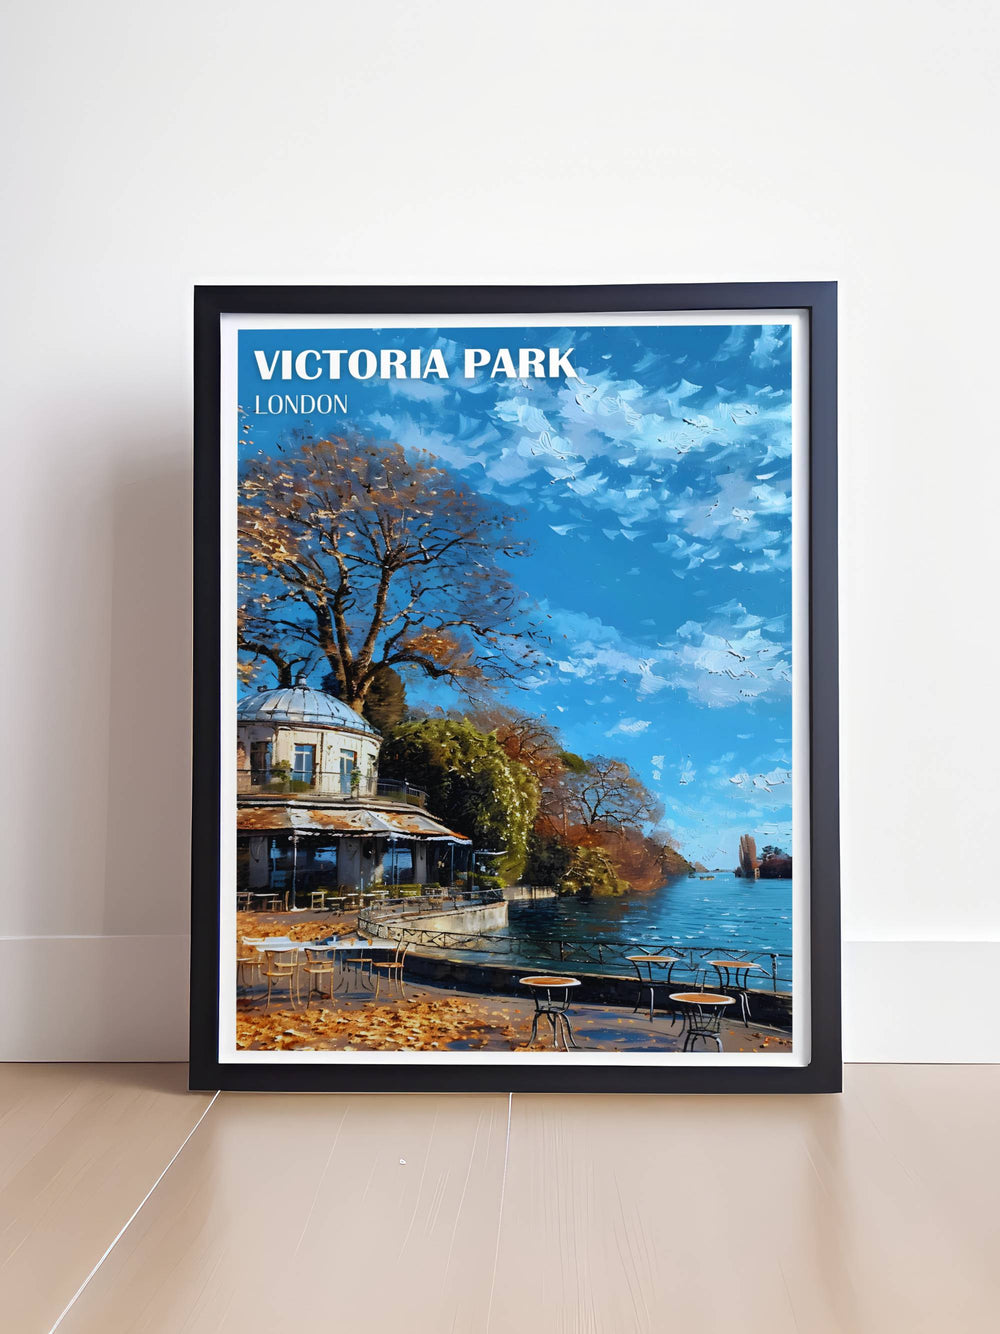 Framed art of the Pavilion Café in Victoria Park, highlighting the inviting atmosphere and picturesque views of the parks lush landscapes.